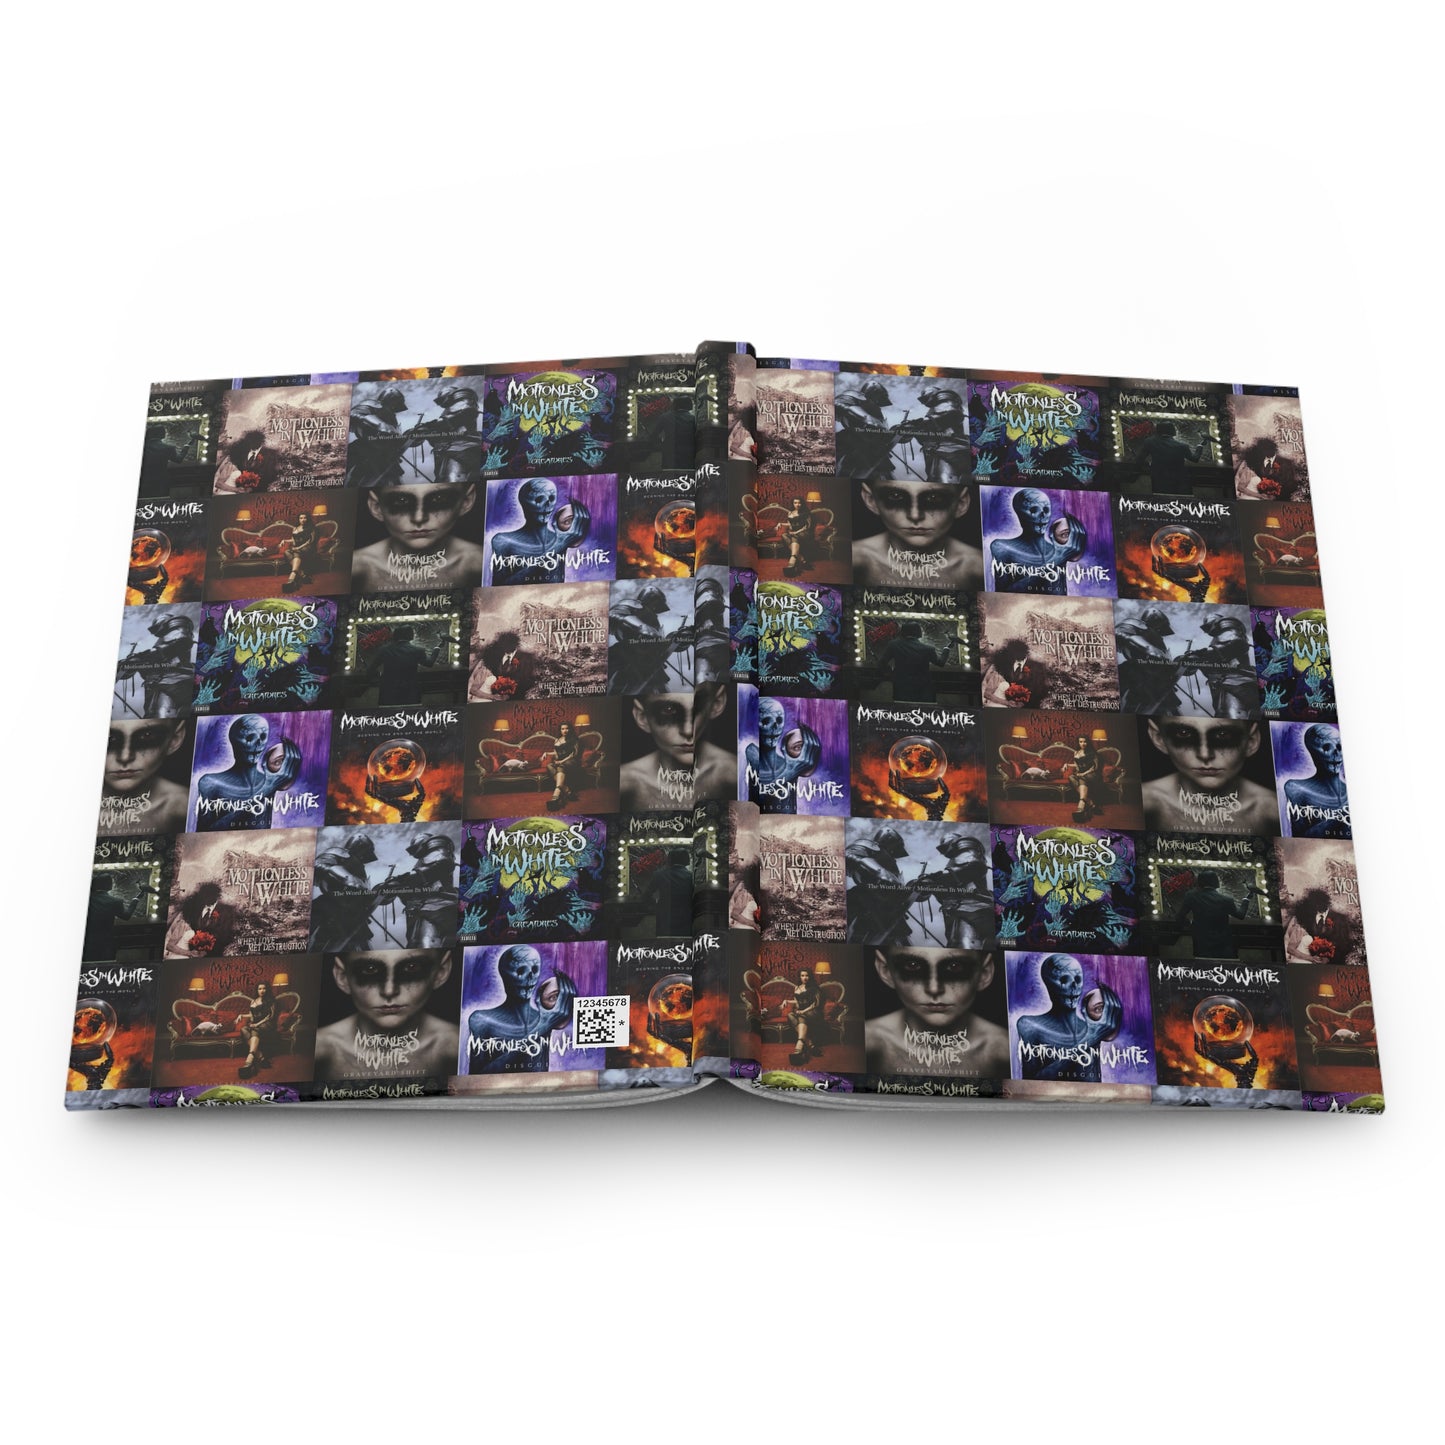 Motionless In White Album Cover Collage Hardcover Journal